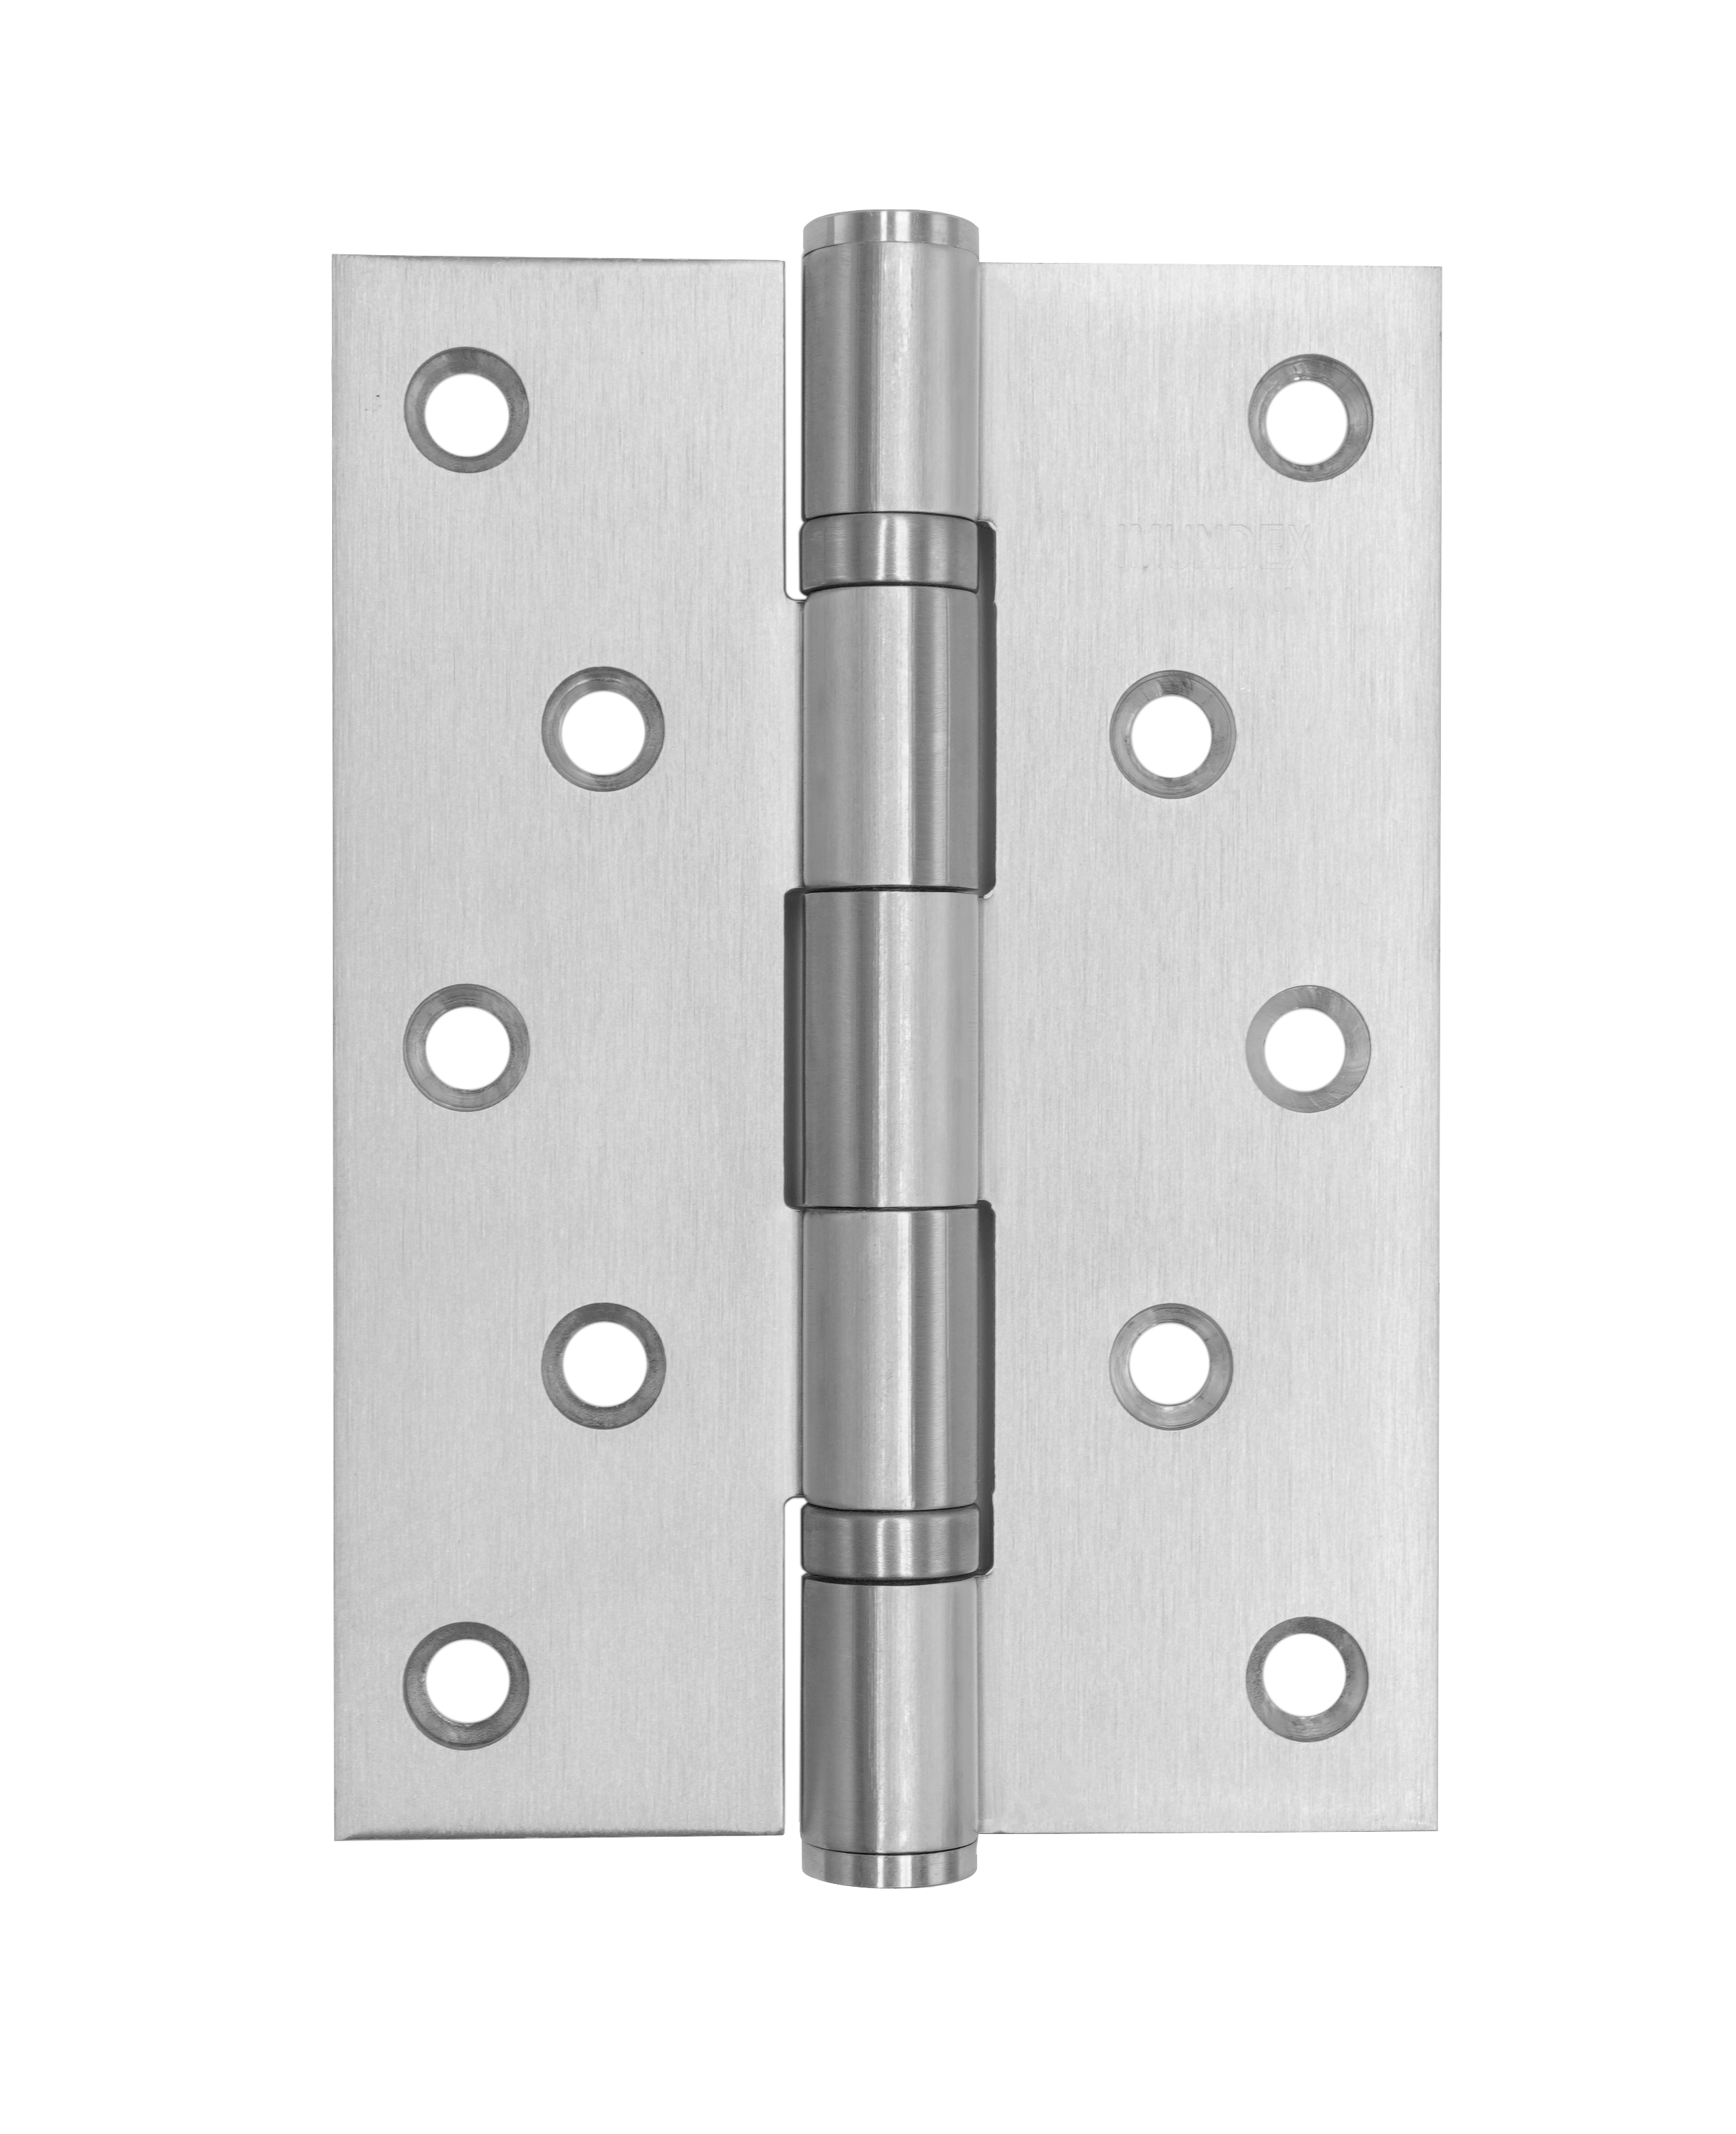 Ball bearing hinges with large size - 2BB - Inox 316